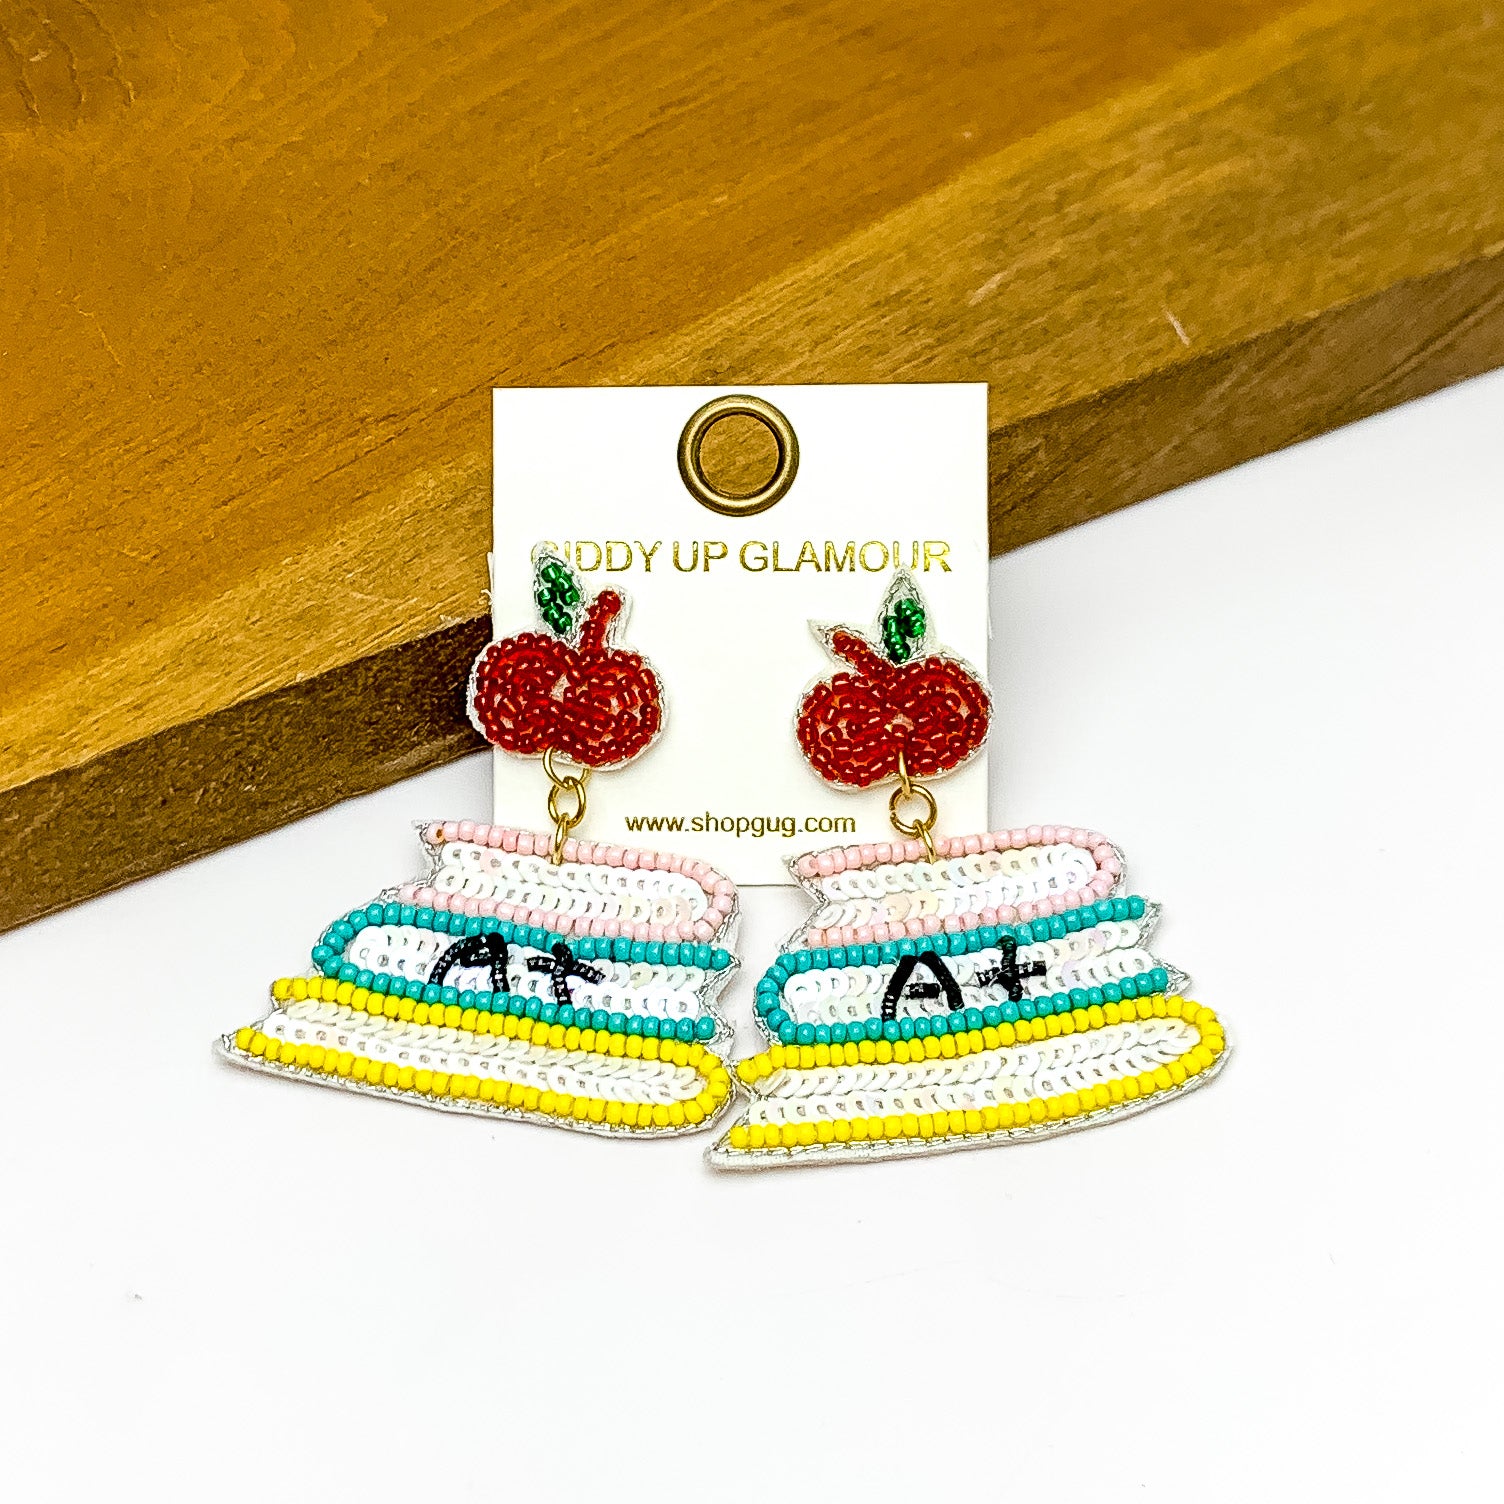 Stacked Books With Apple Post in Multicolor. Pictured on a white background with the earrings against a wood piece.